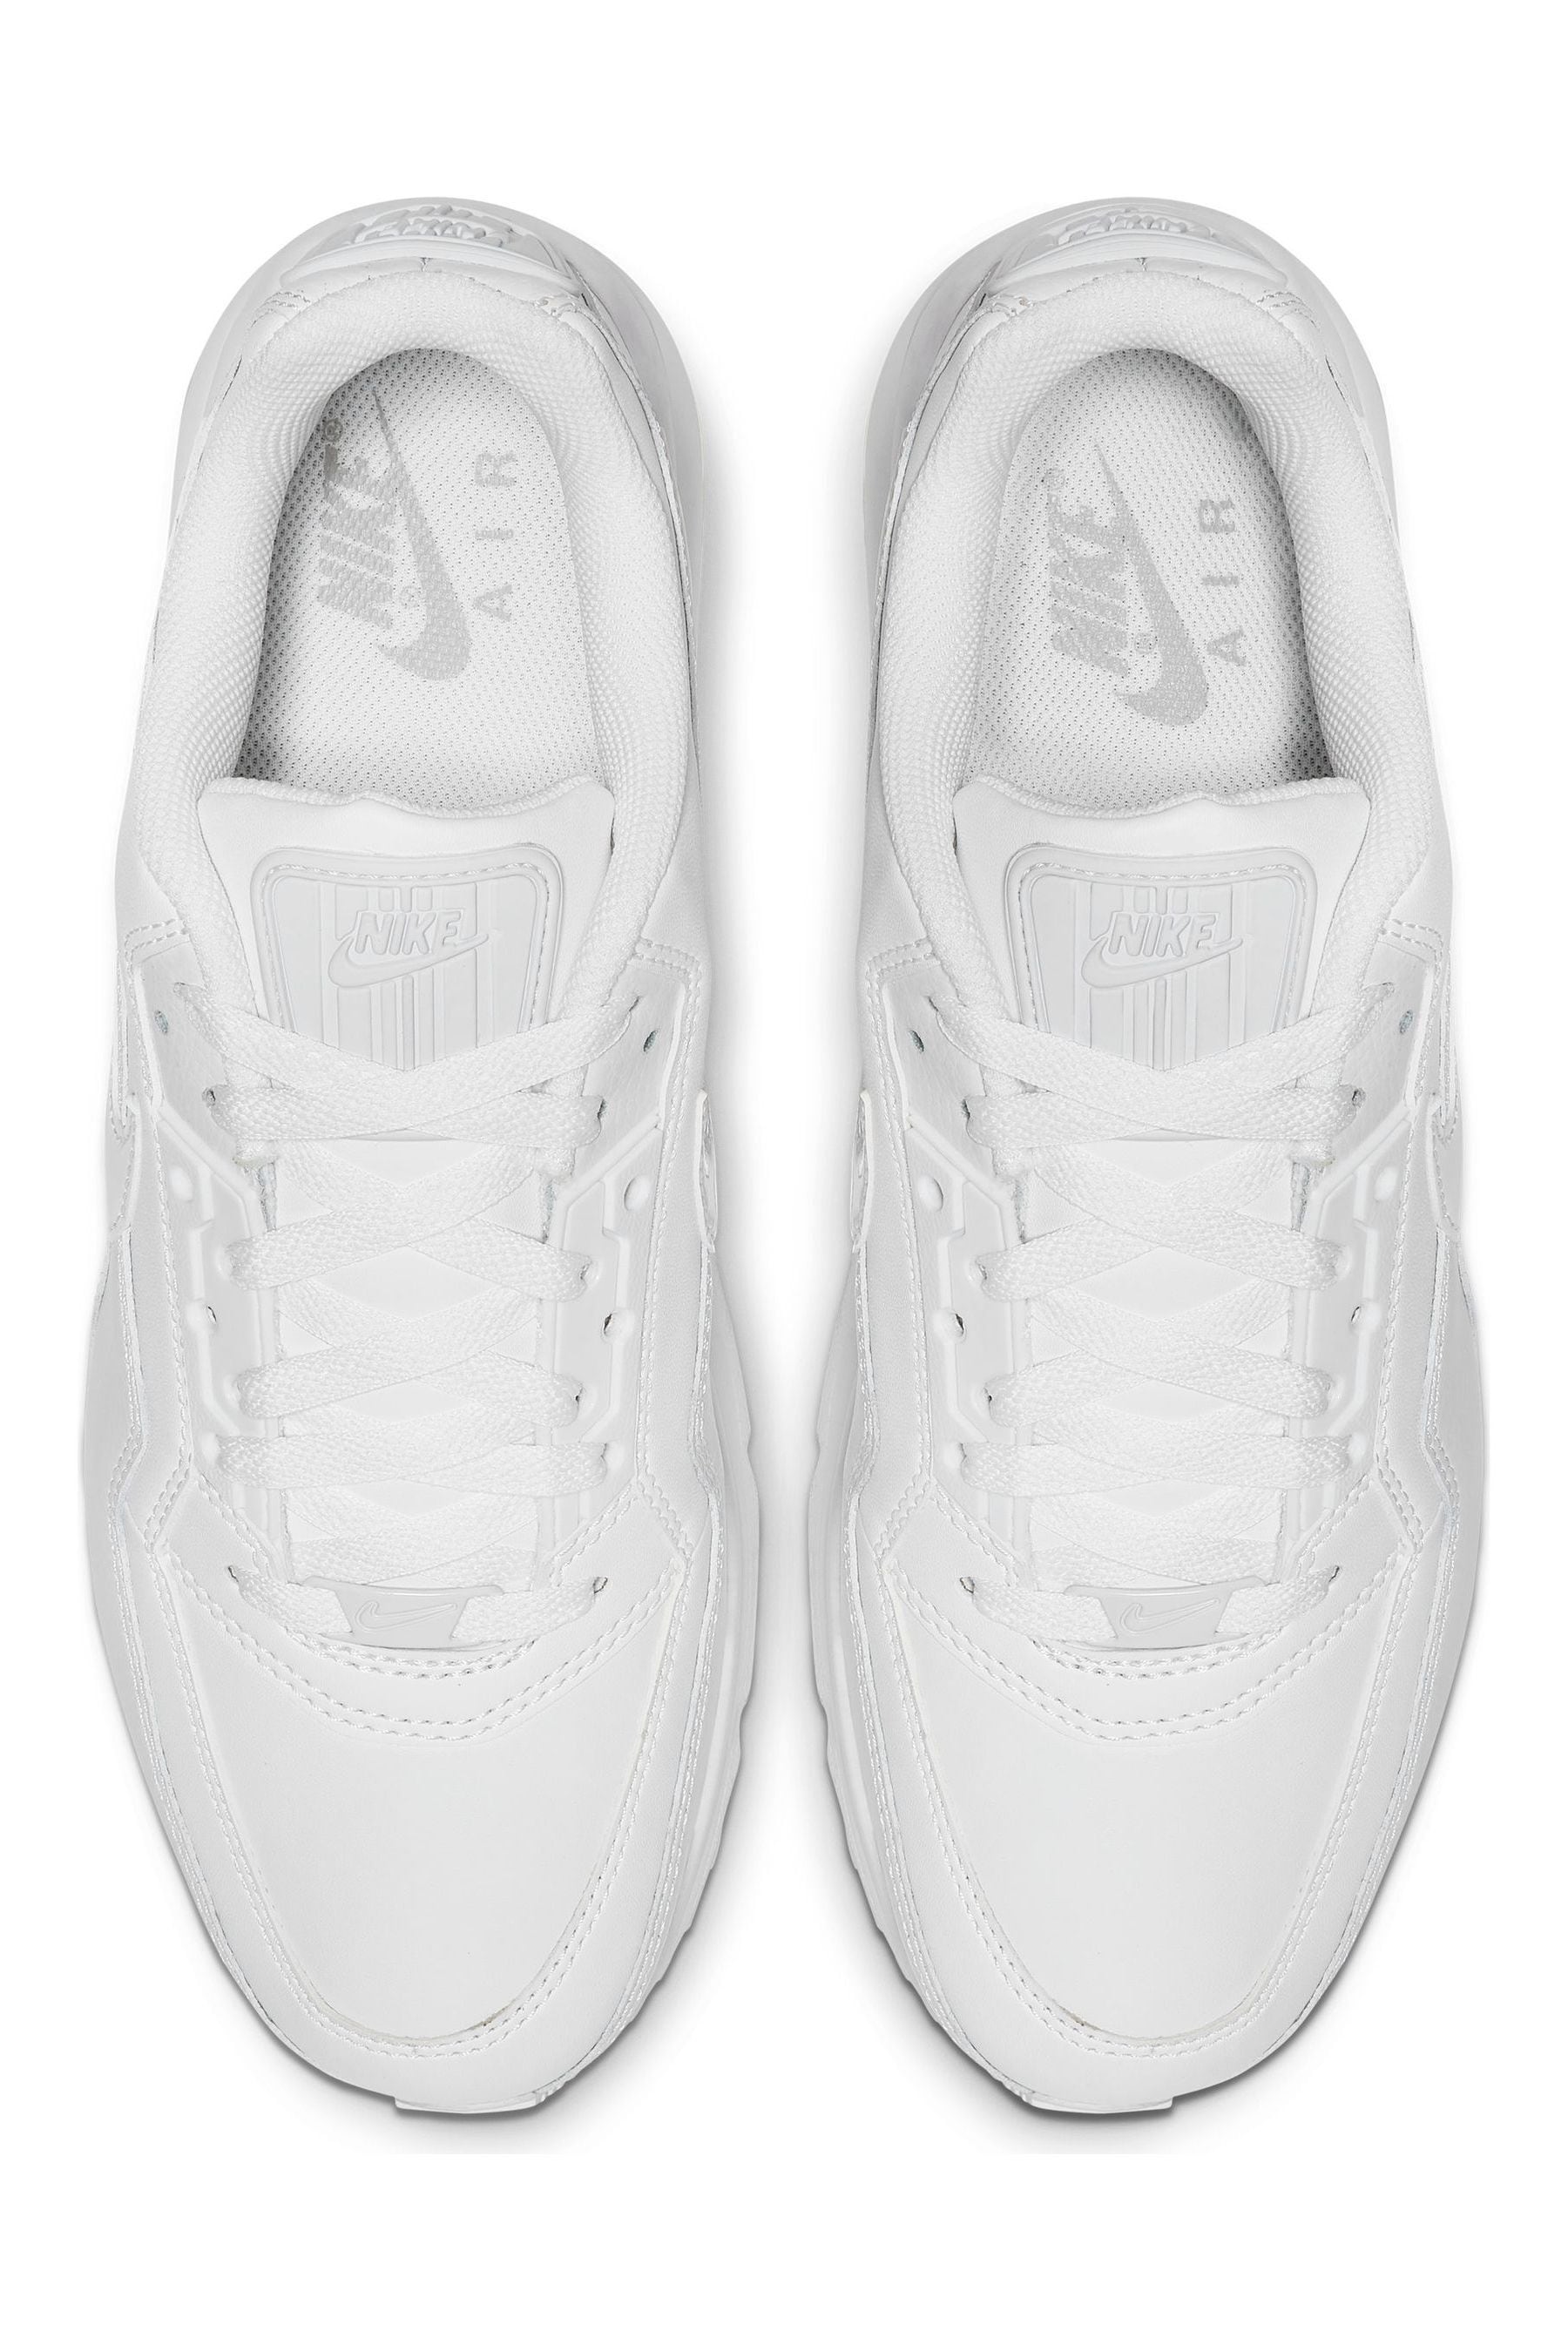 Buy Nike White Air Max LTD 3 Trainers from the Next UK online shop